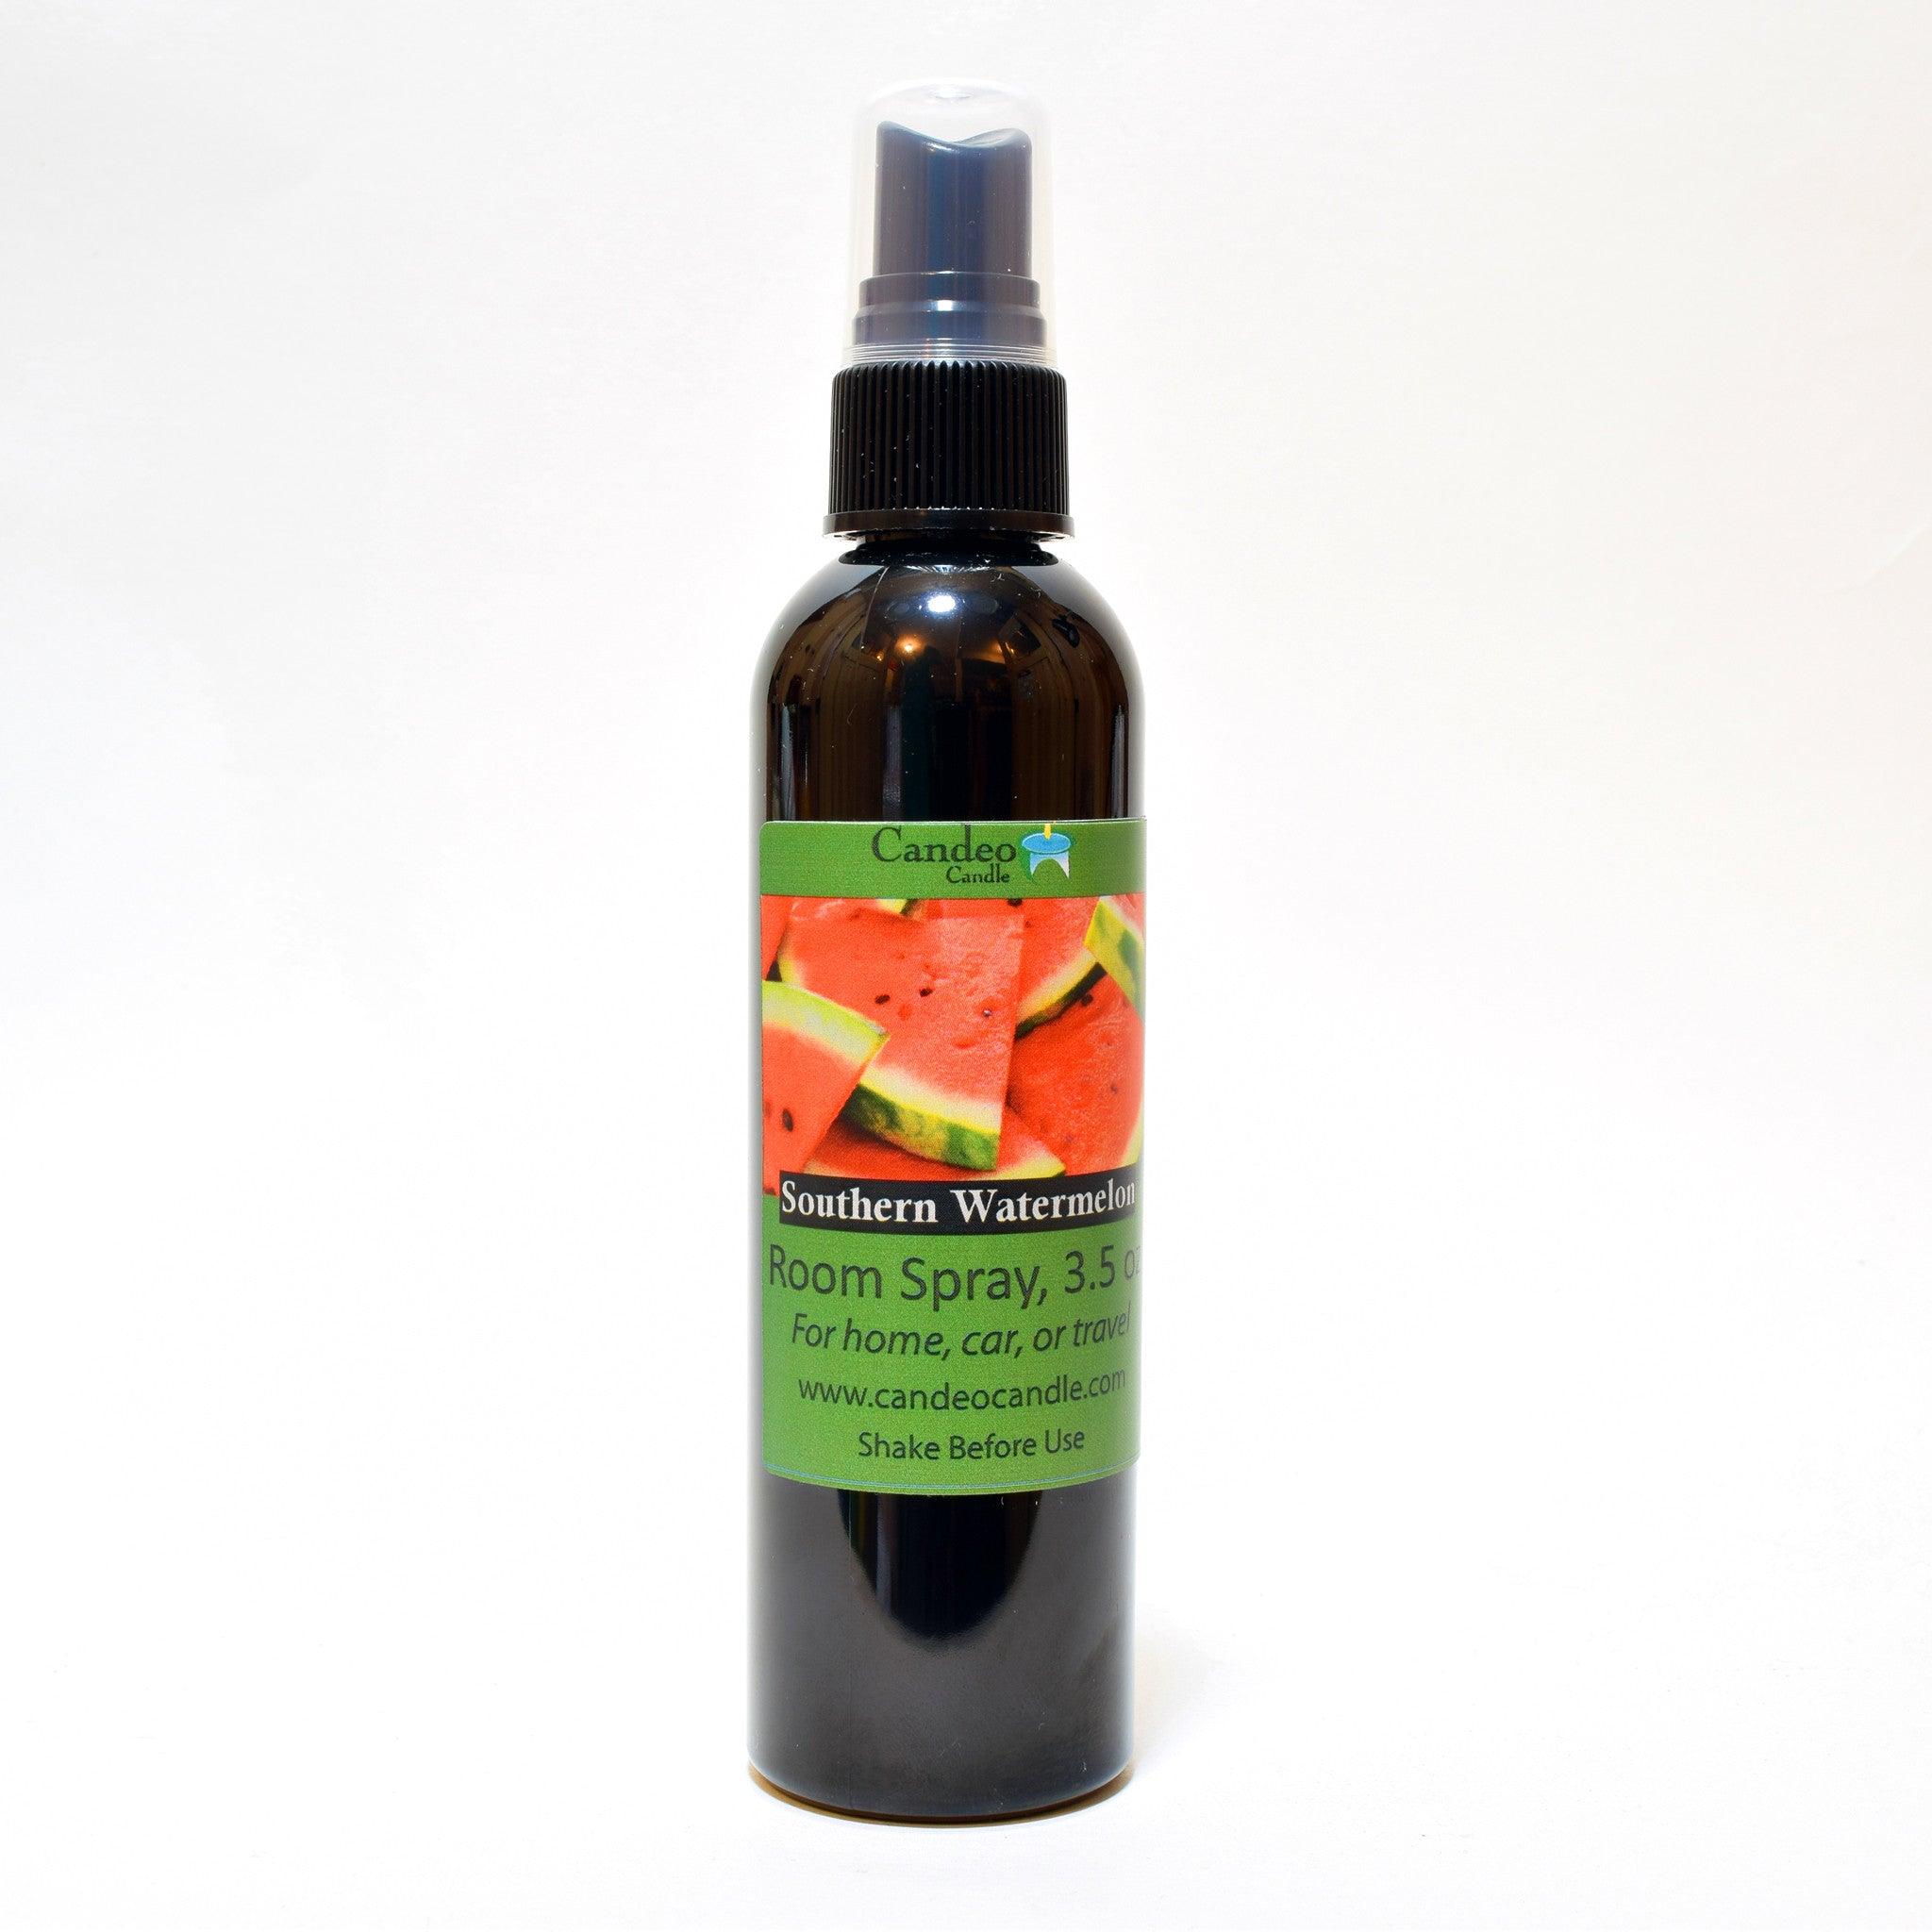 Southern Watermelon, 3.5 oz Room Spray - Candeo Candle